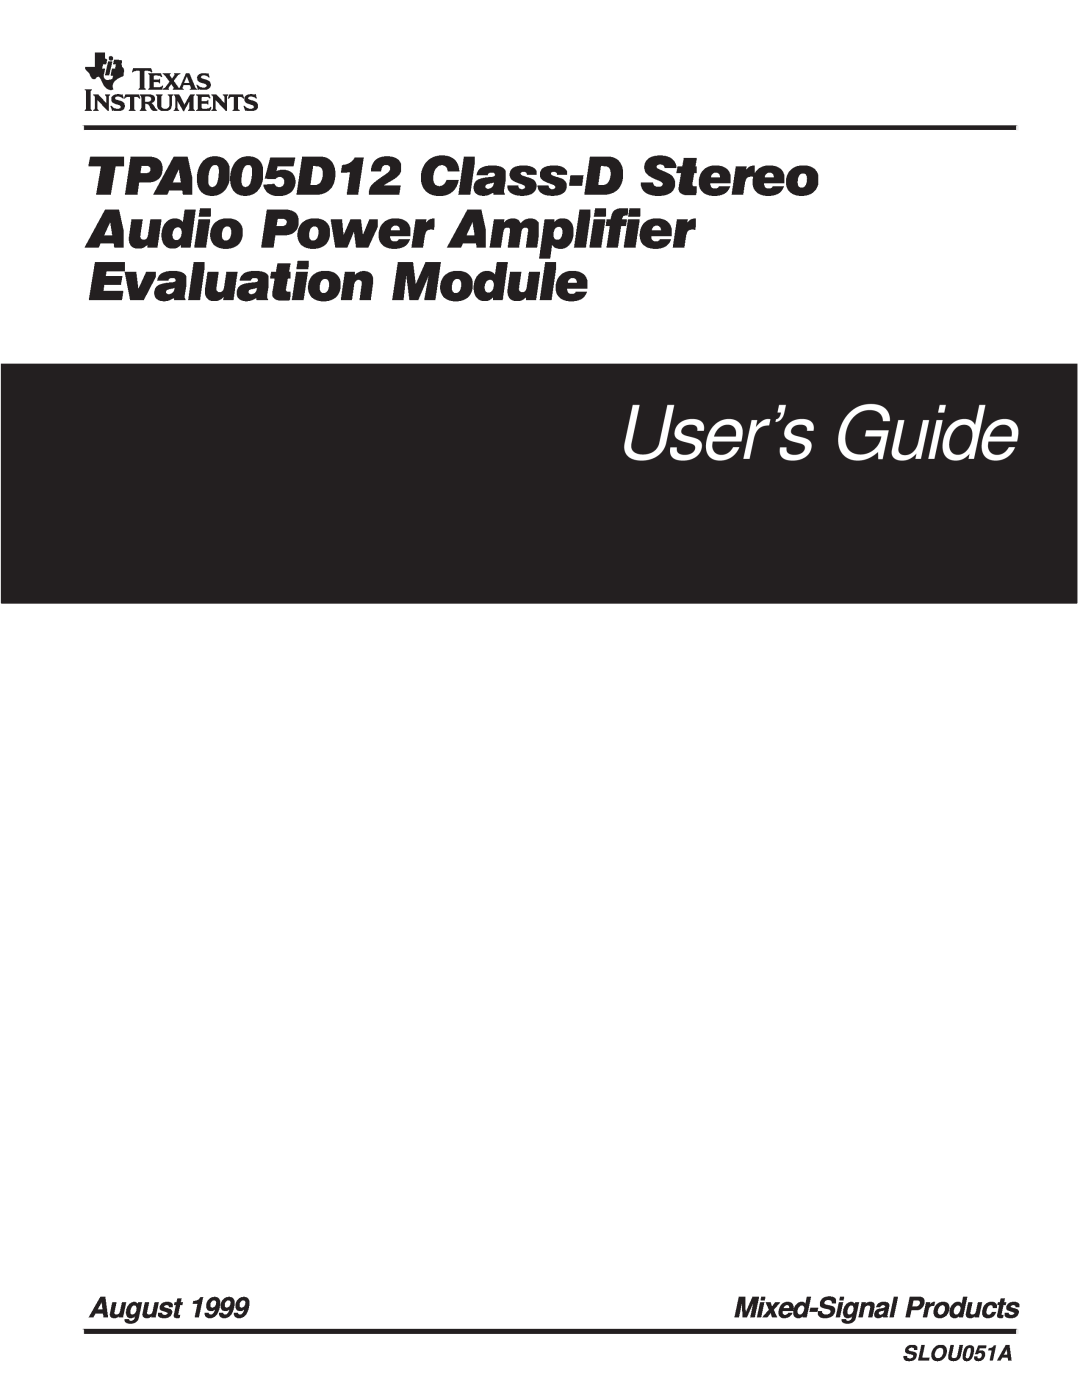 Texas Instruments manual Users Guide, TPA005D12 ClassD Stereo Audio Power Amplifier, Evaluation Module, August 